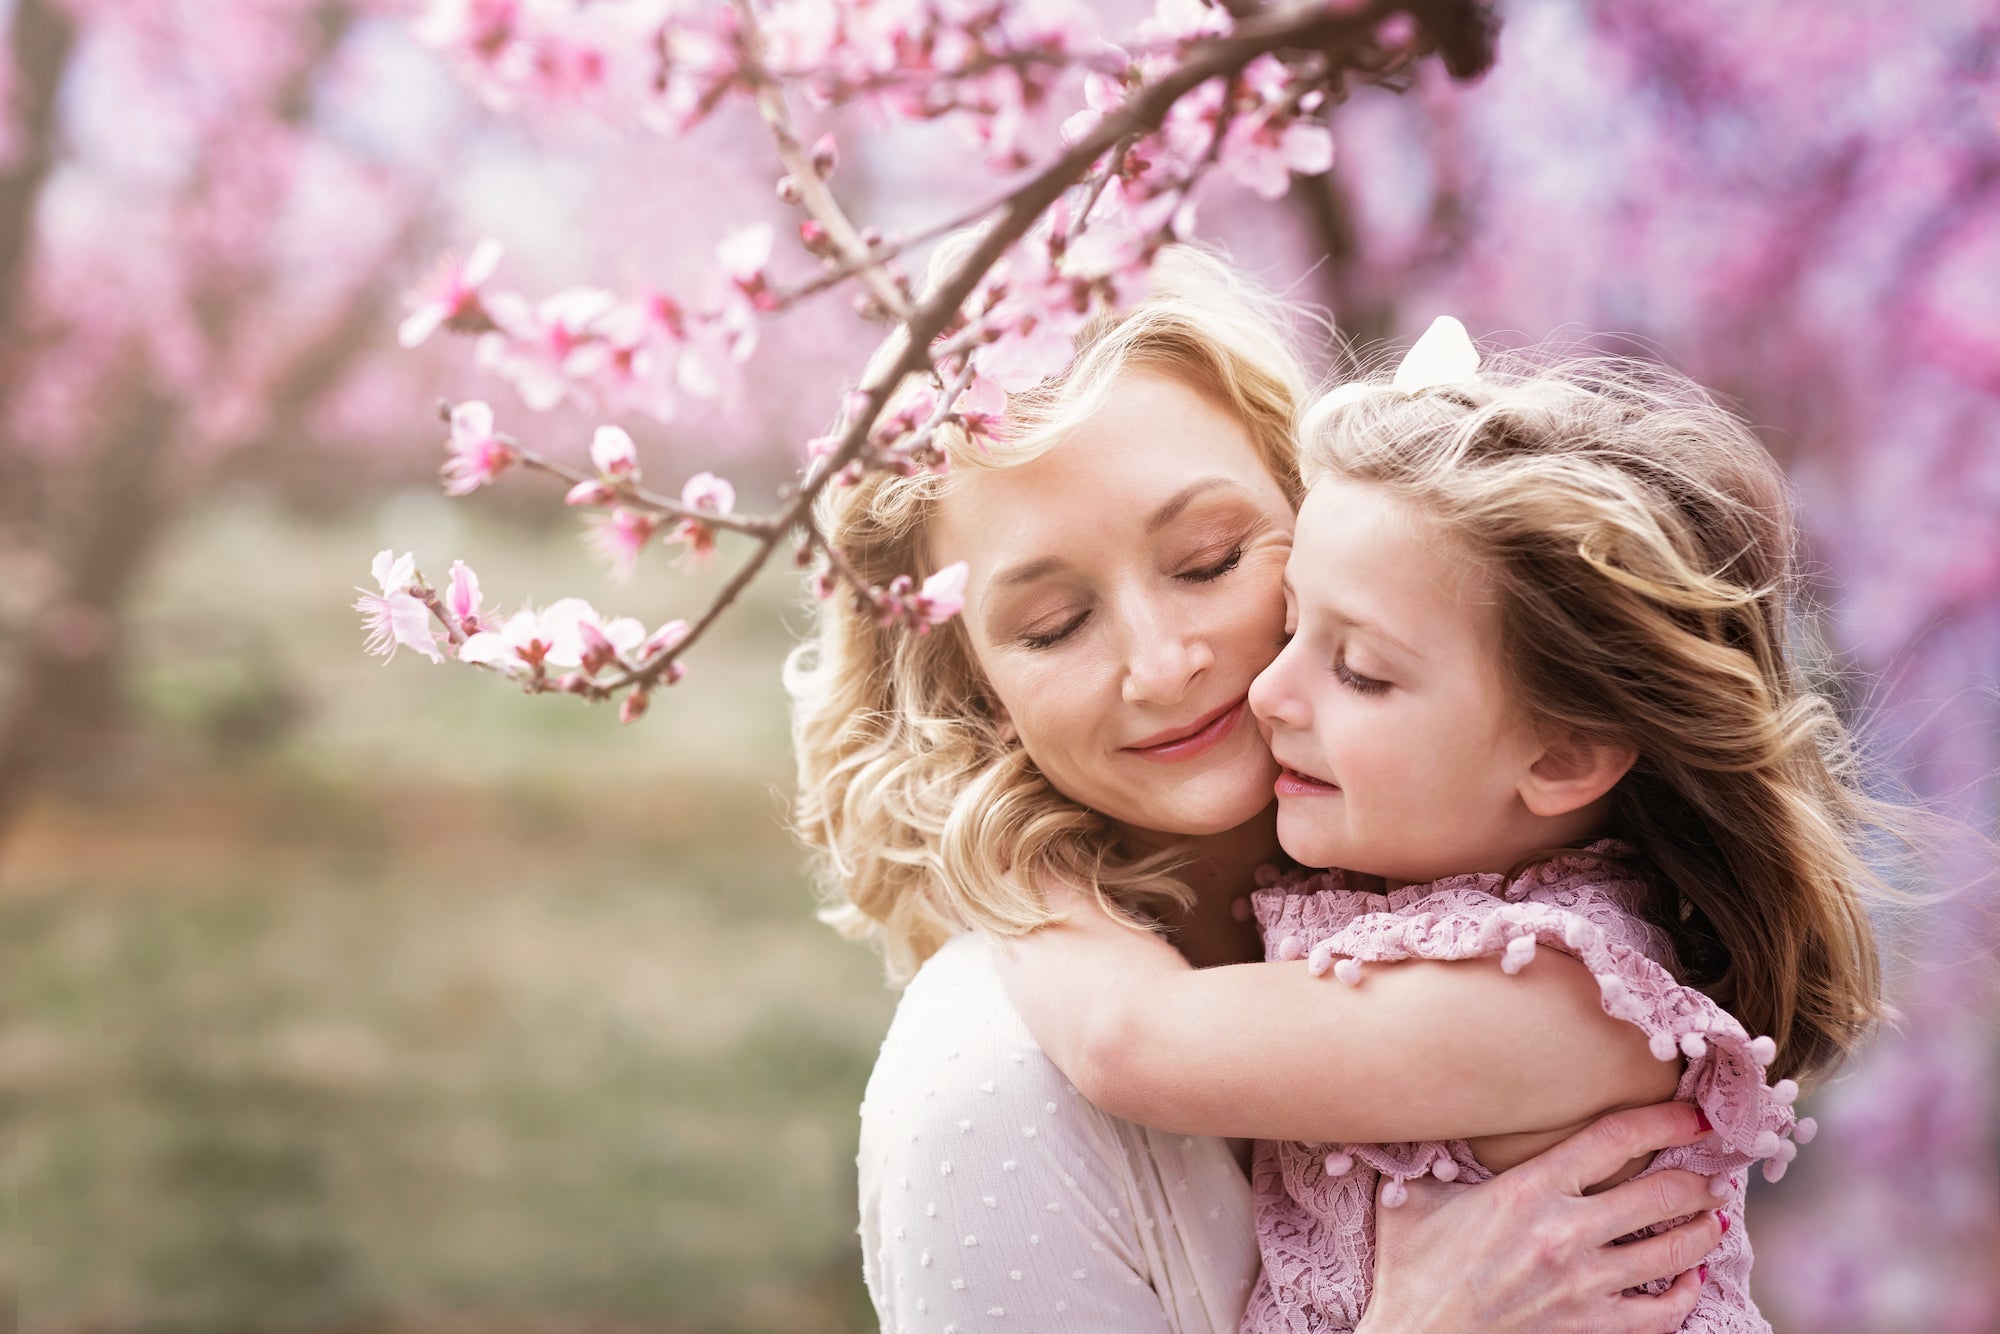 Love your mum? Then rid her home of allergies today! - CYCLE eco-friendly cleaners